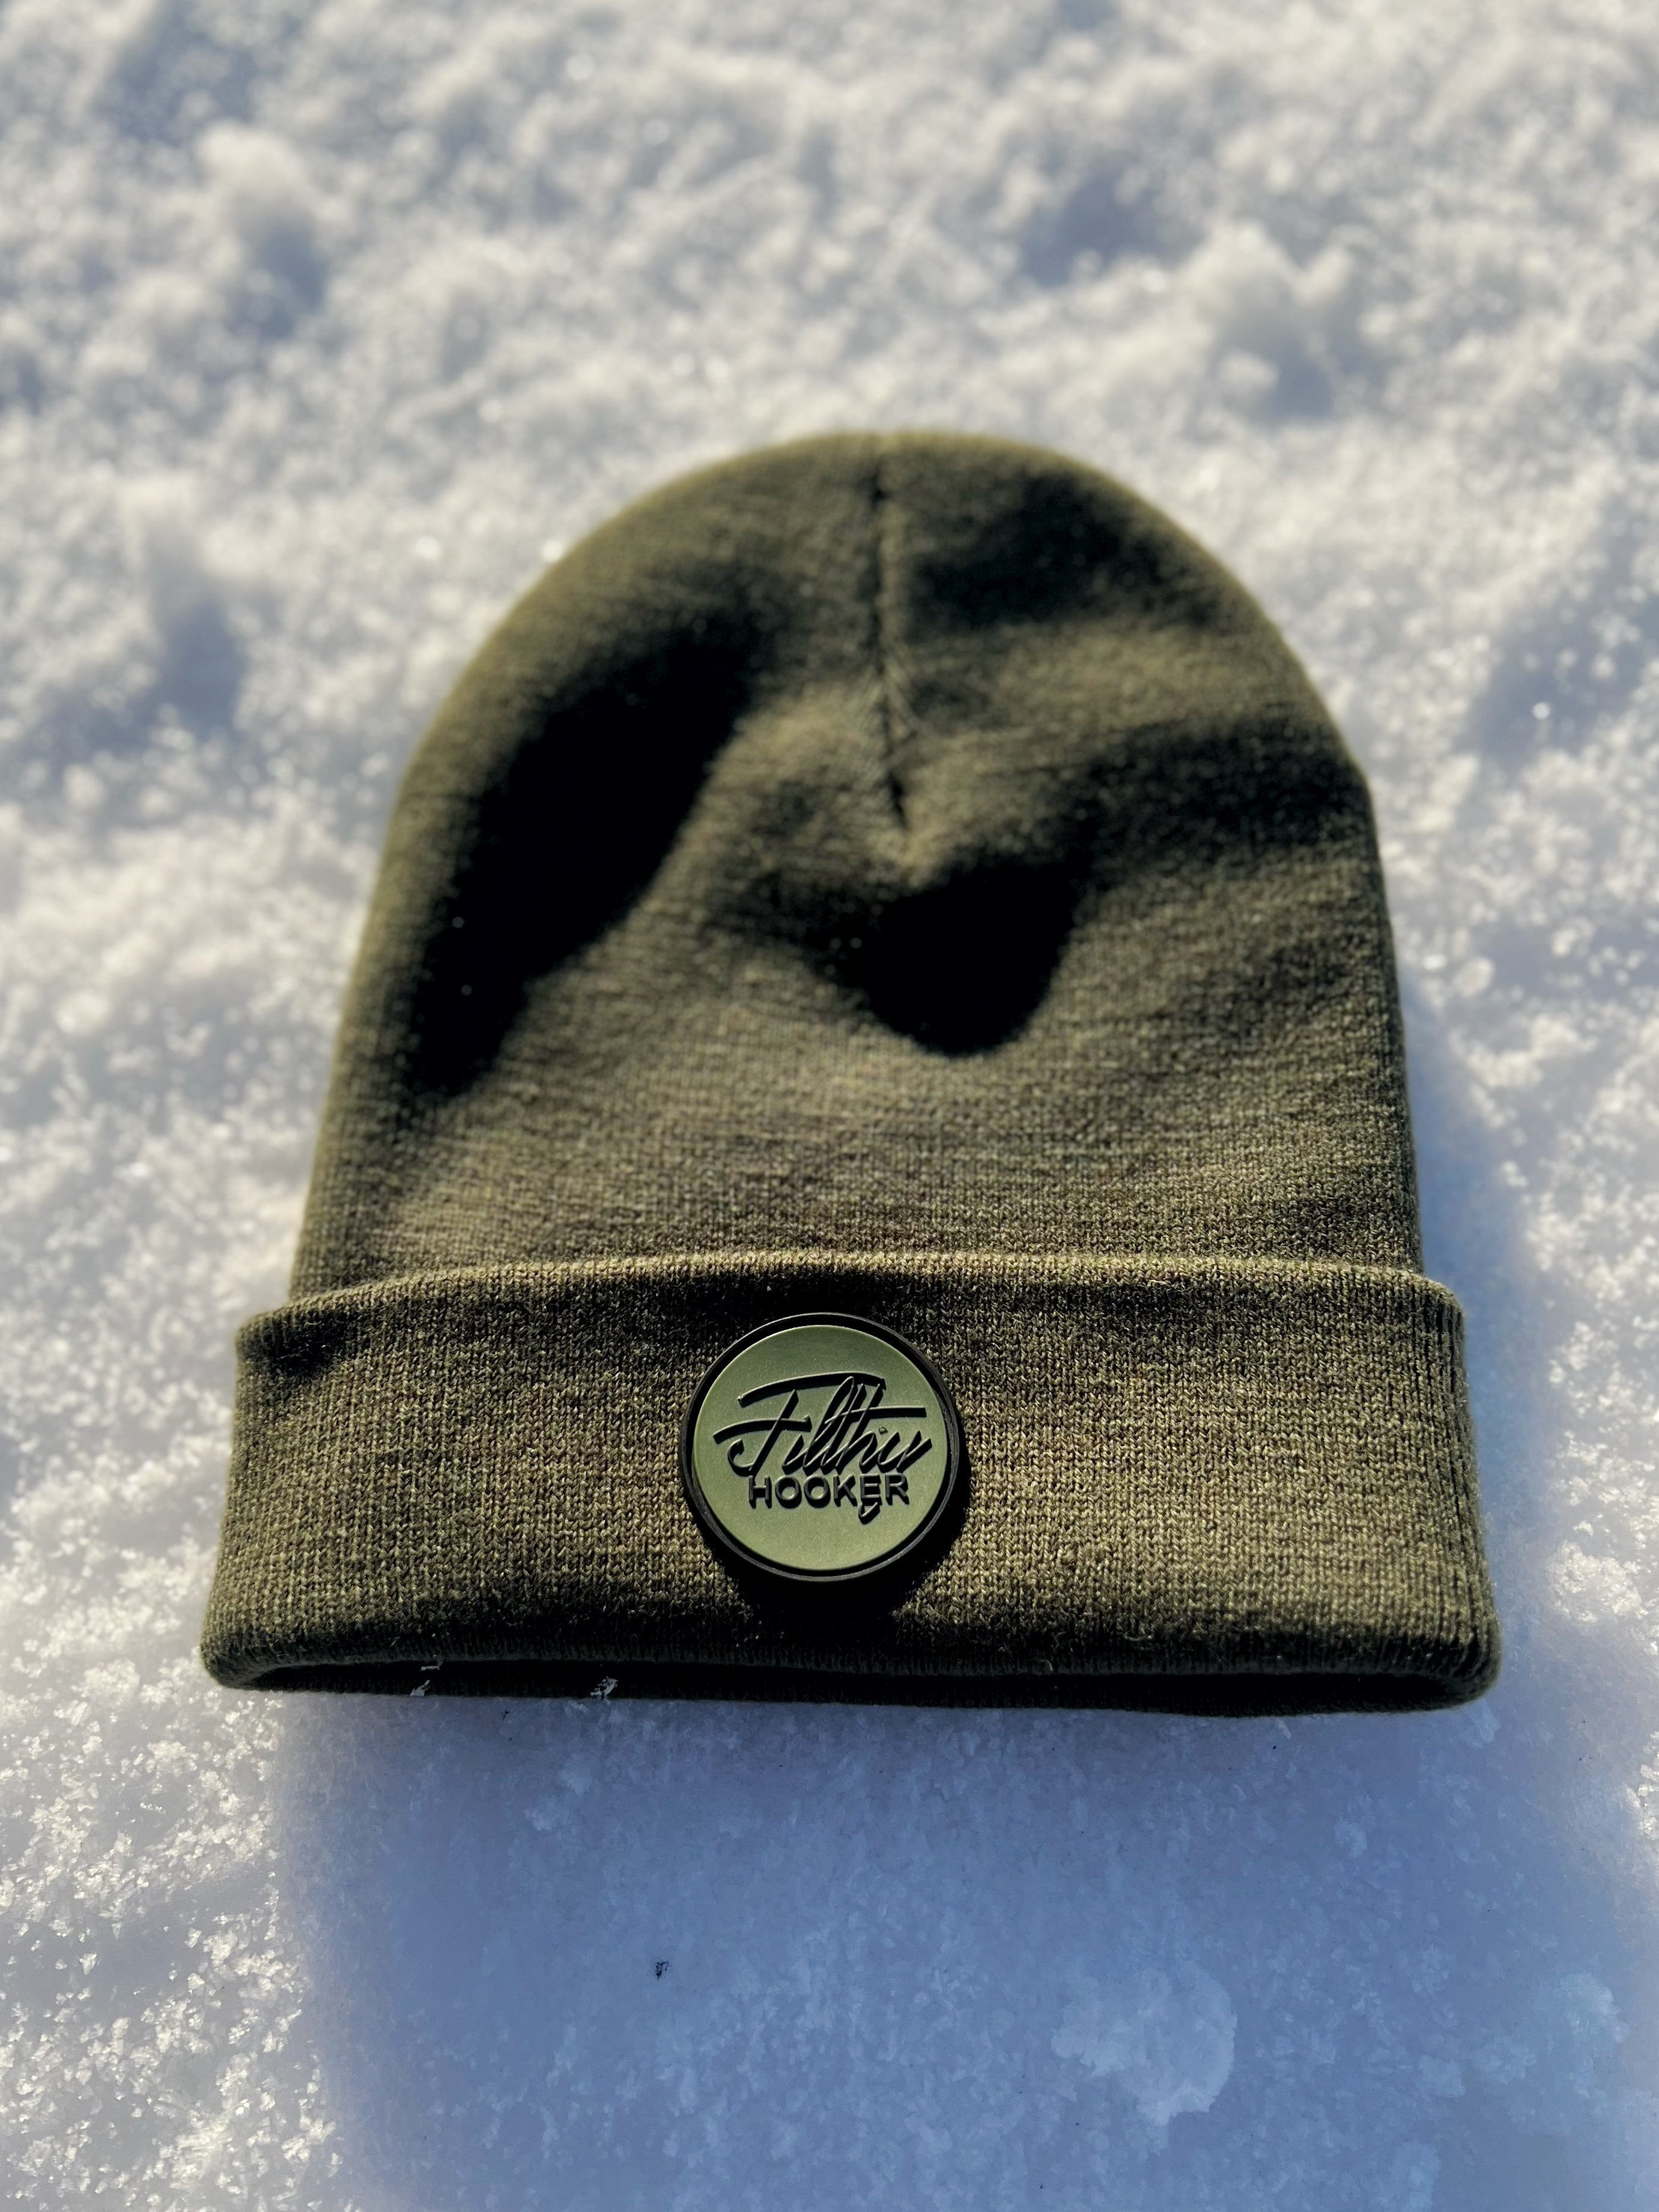 2023 Classic Filthy Hooker Beanie